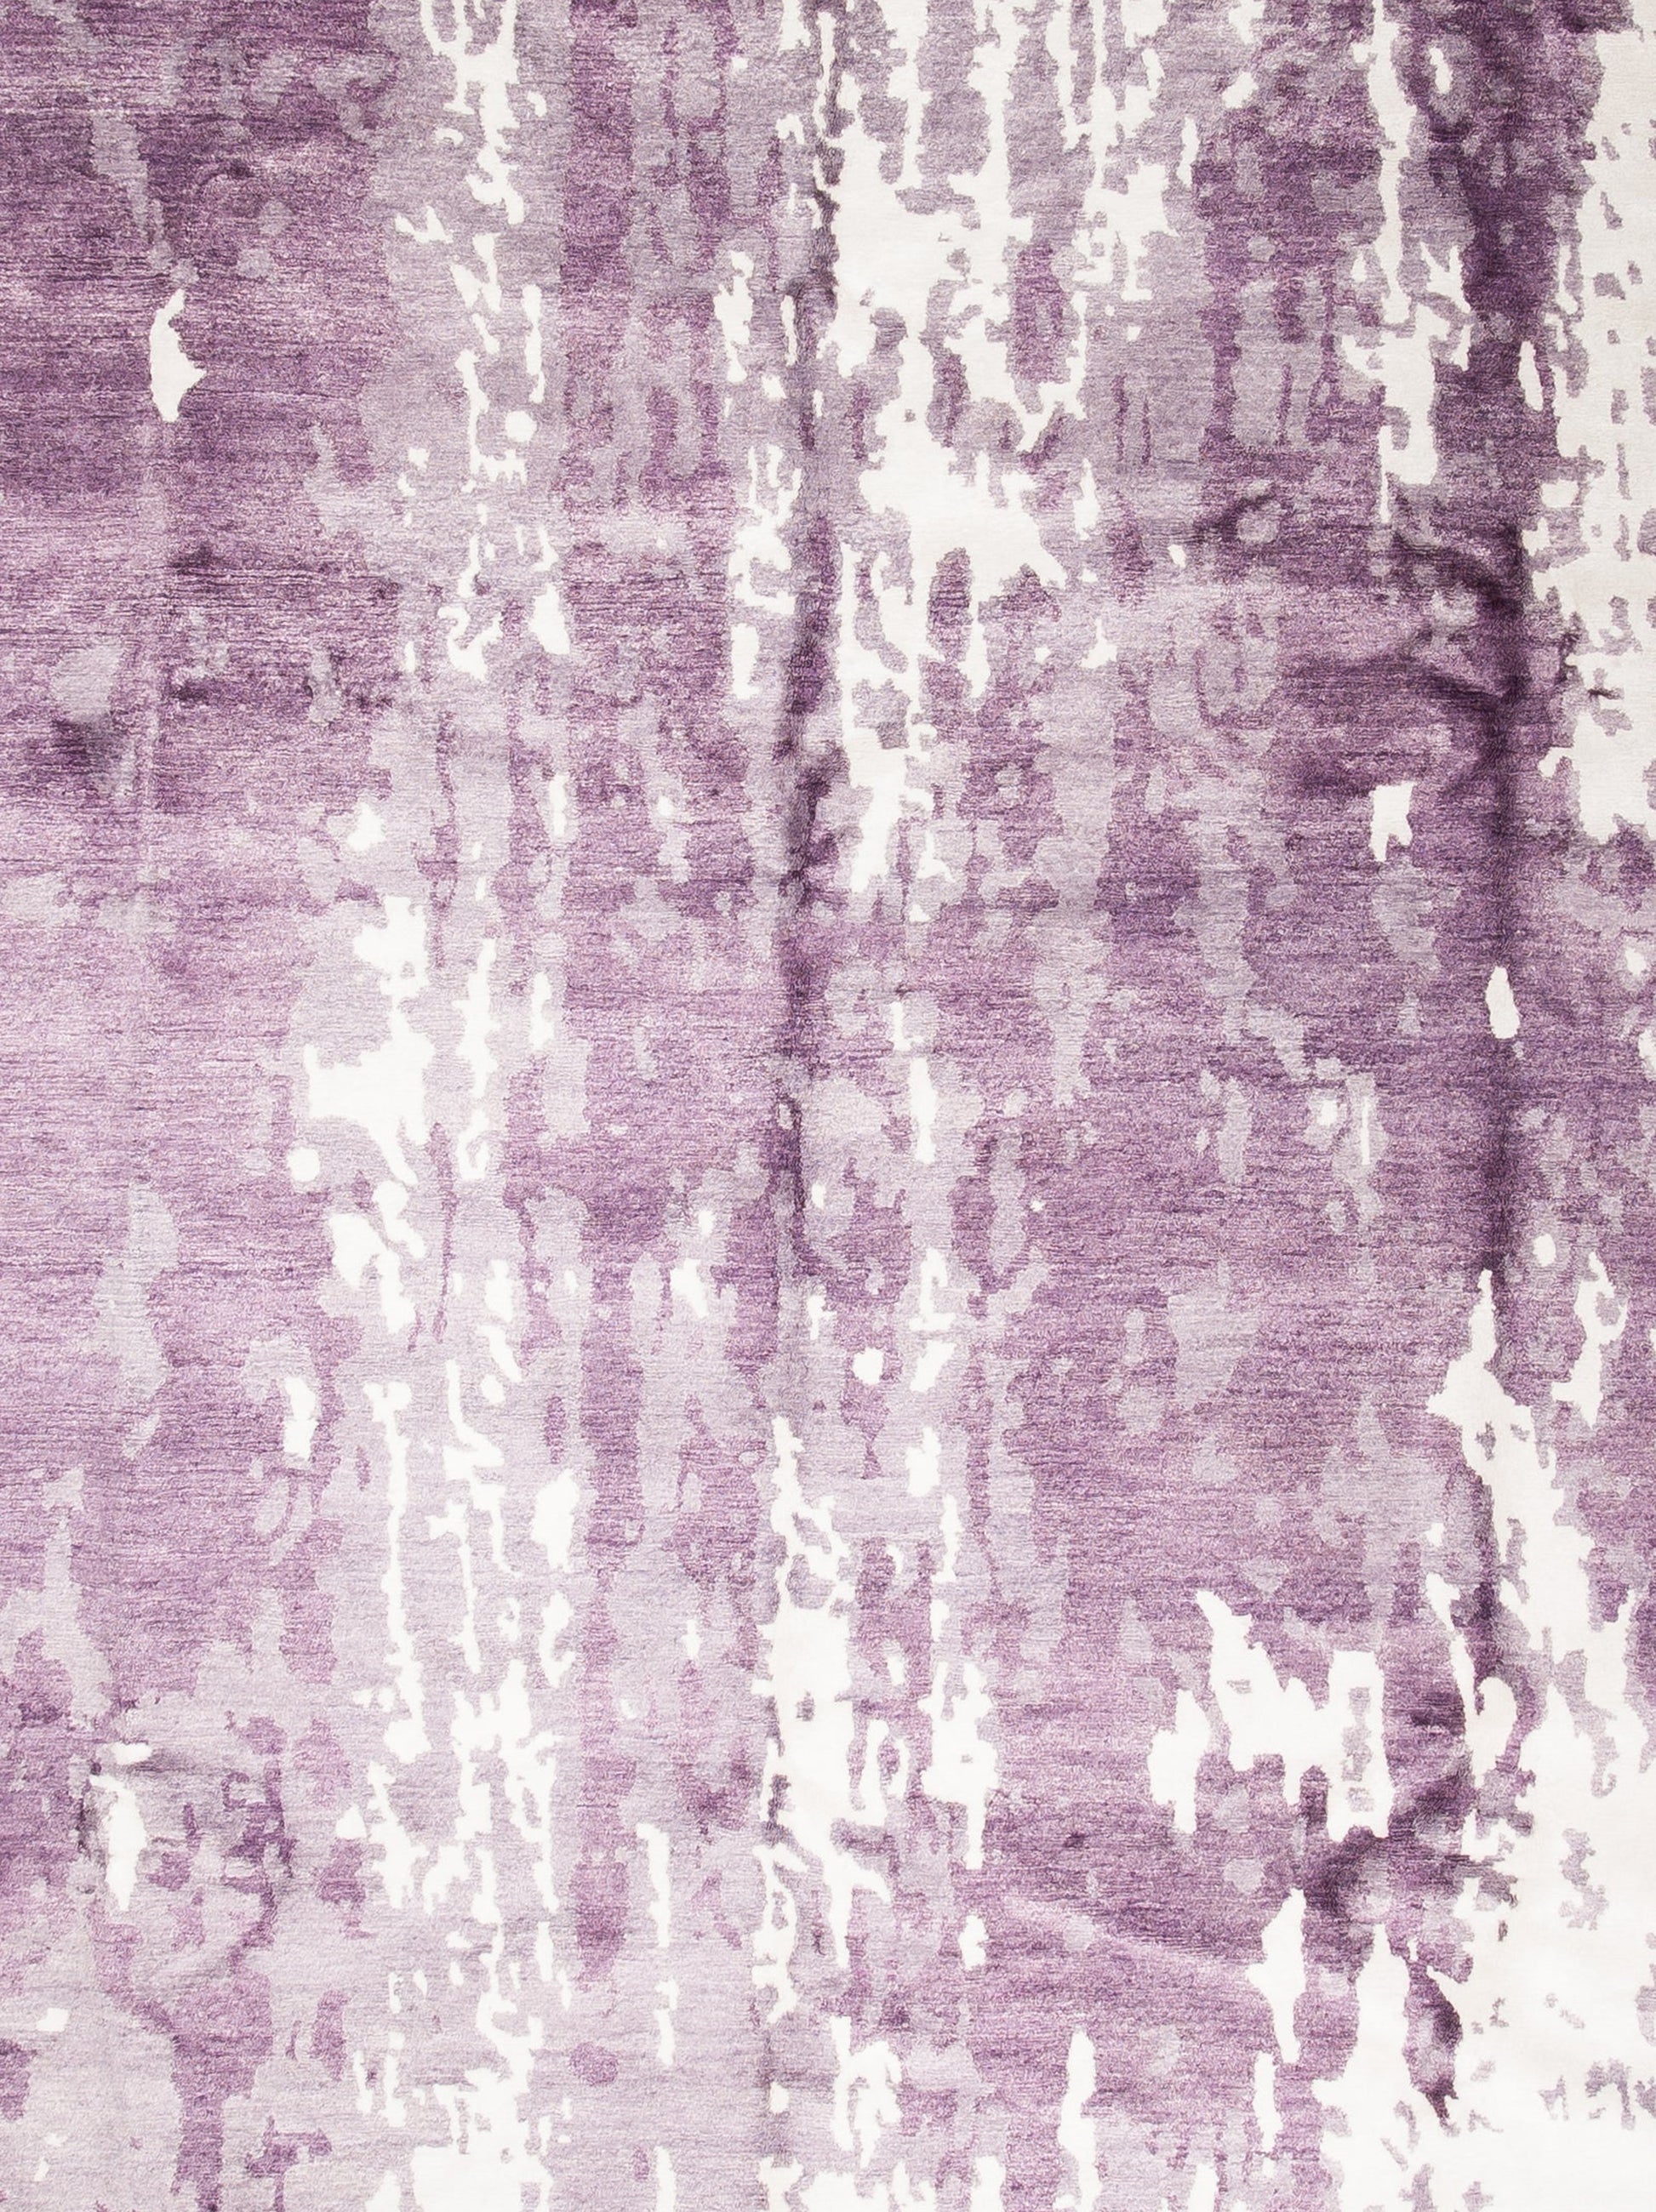 the close up of the center shows how beautiful the purple color scheme is knotted in this rug.